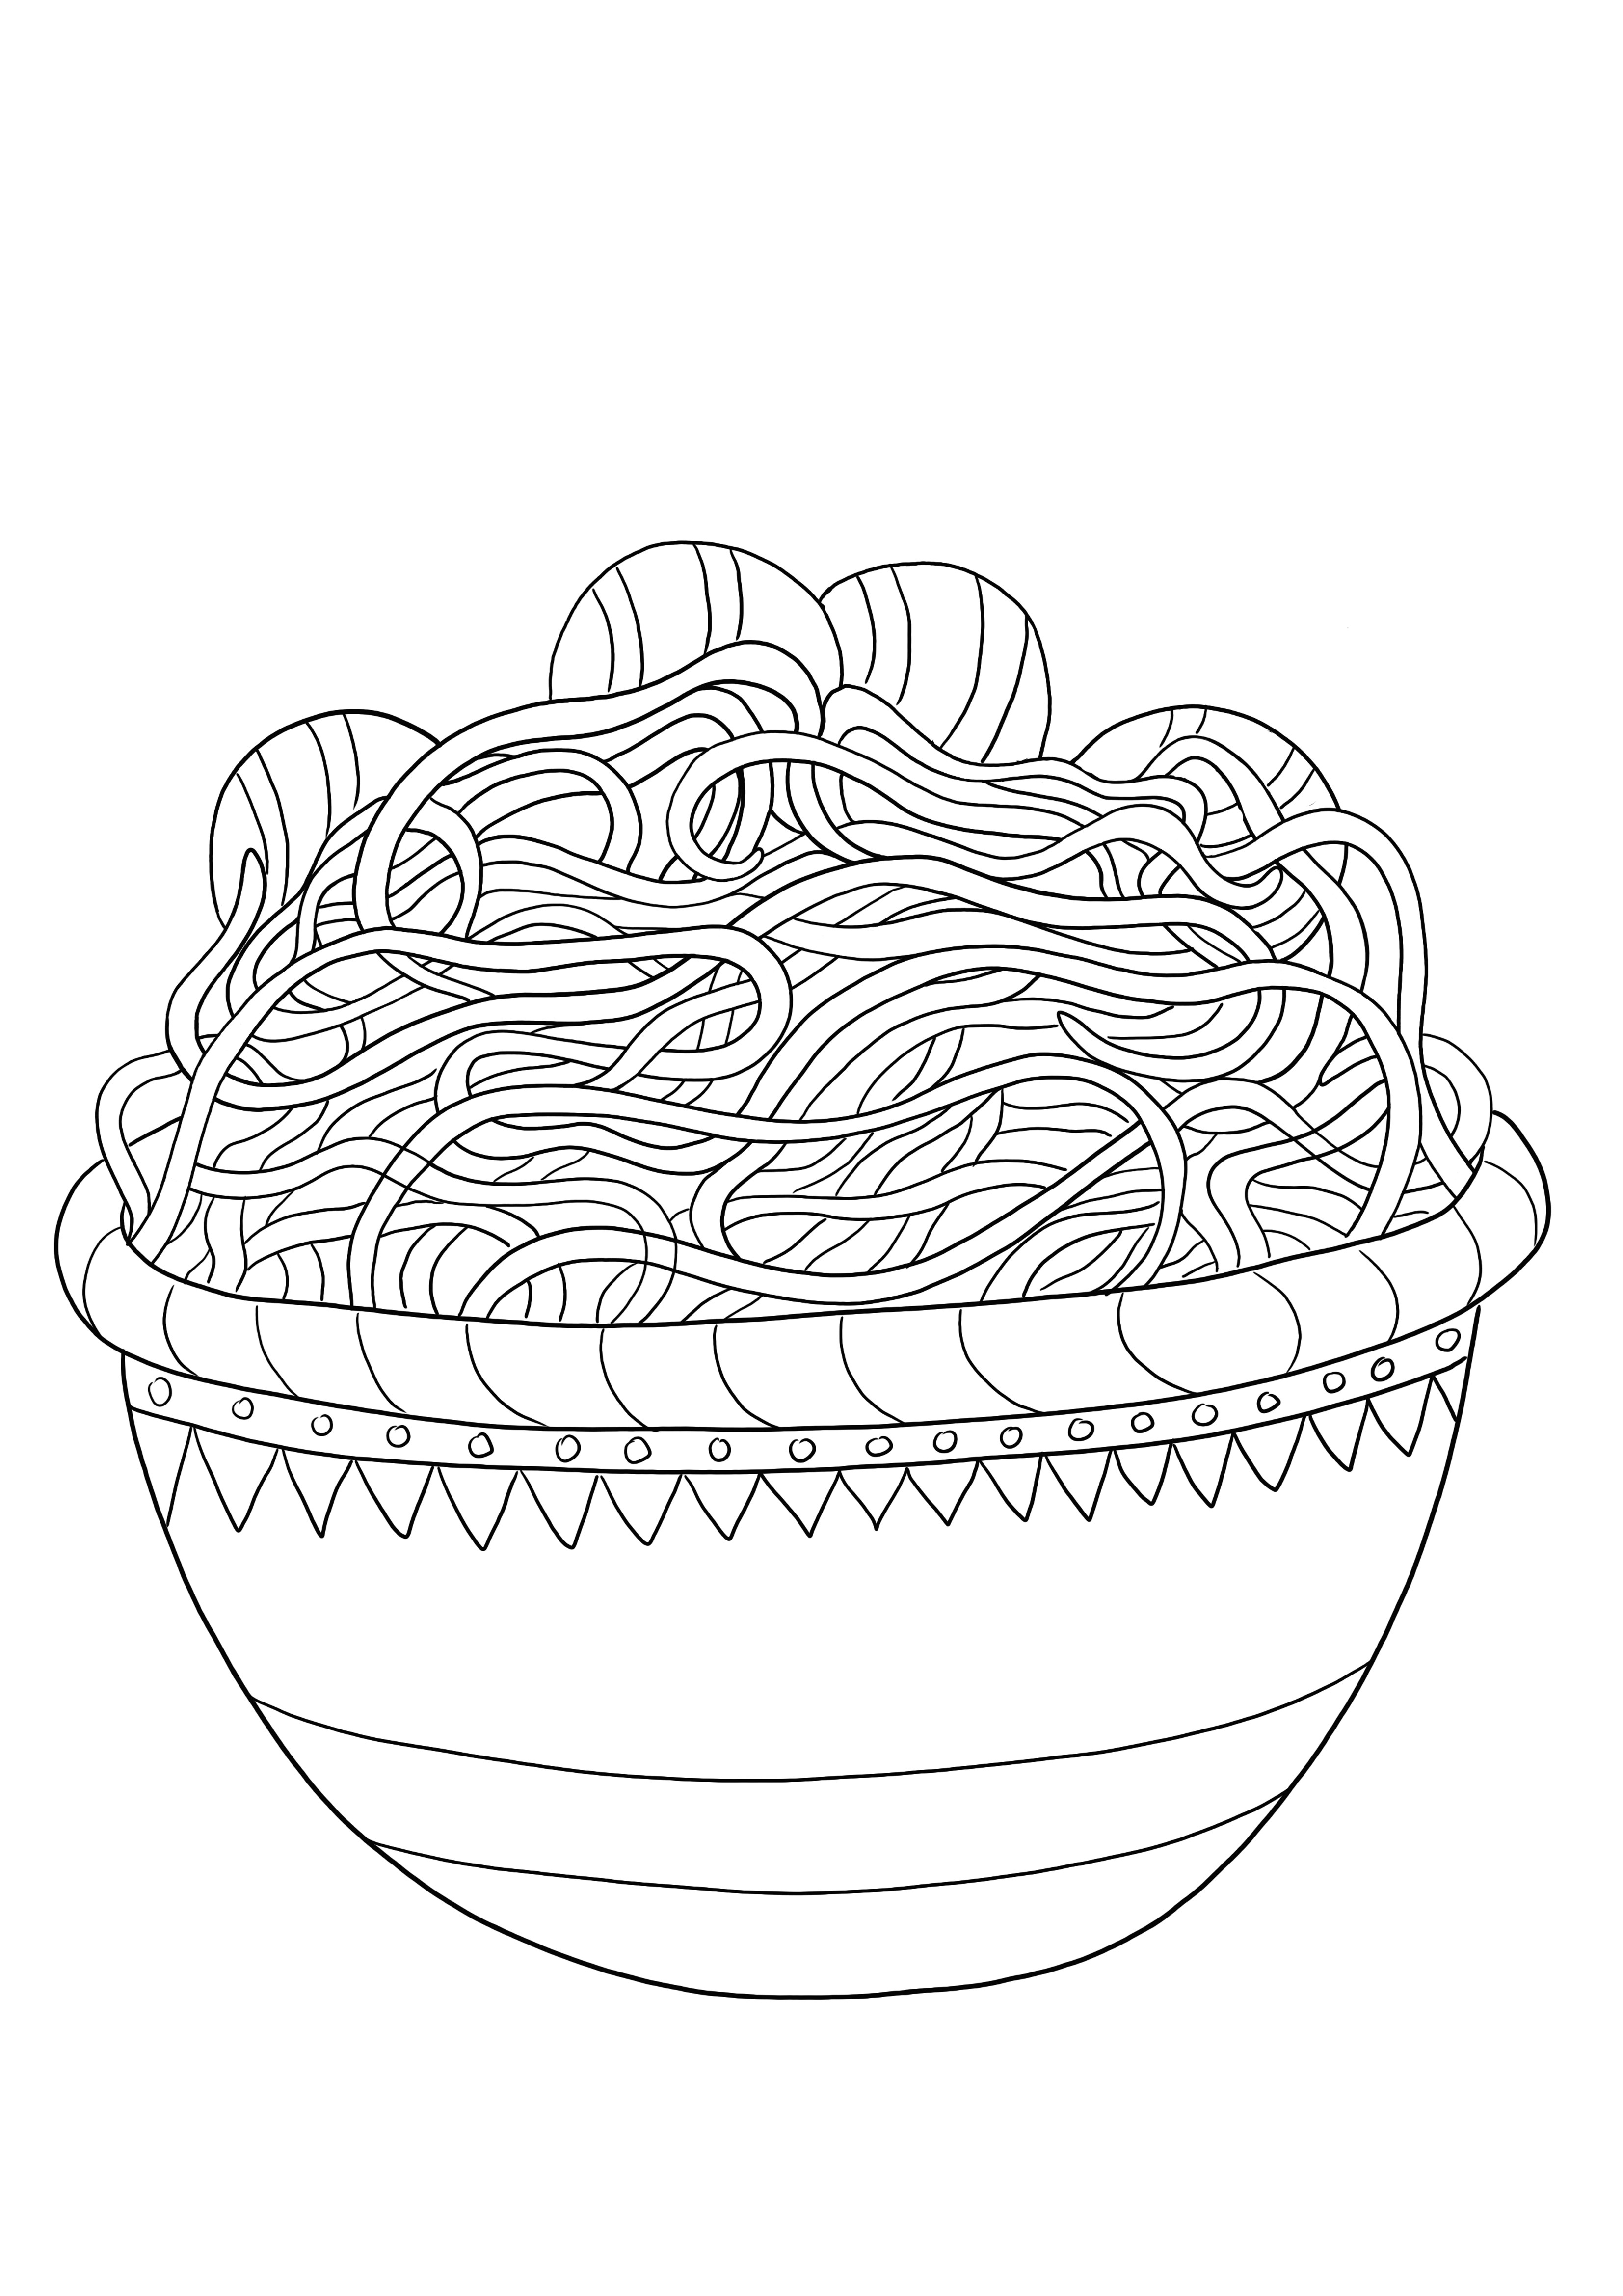 Free printable for easy coloring of a bowl of spaghetti picture for kids